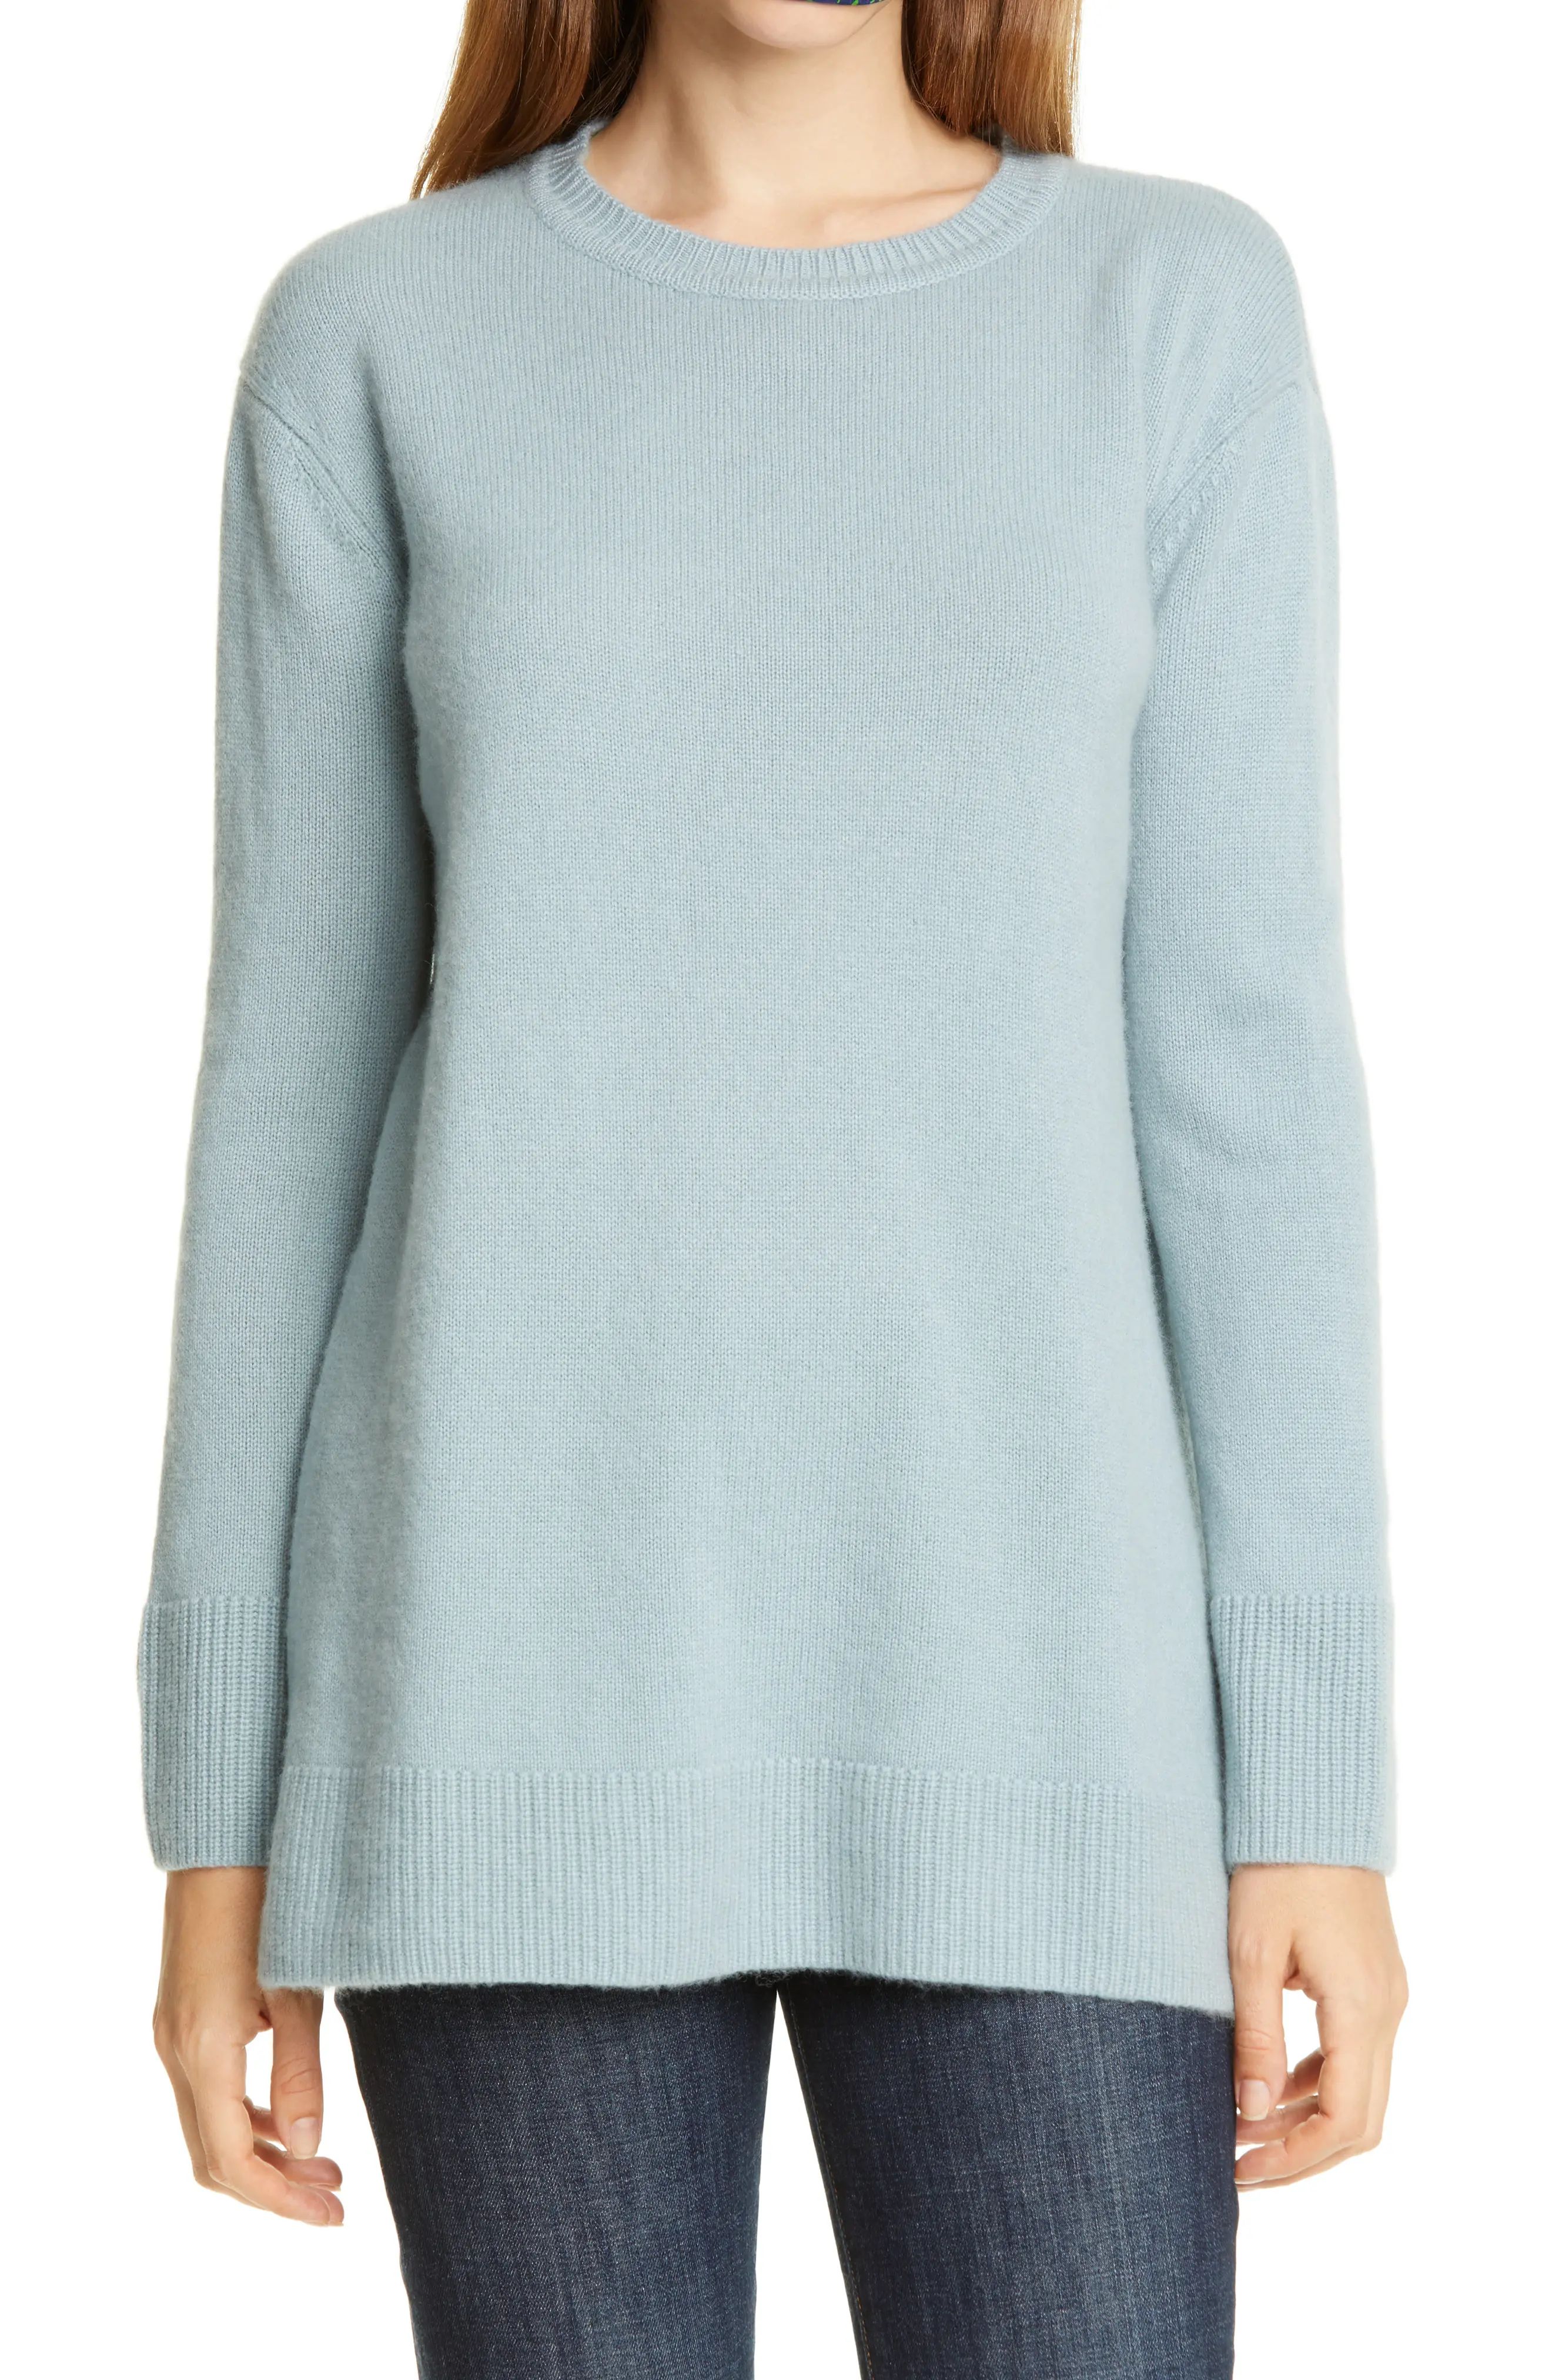 Women's Nordstrom Signature Cashmere Tunic Sweater, Size Small - Blue | Nordstrom